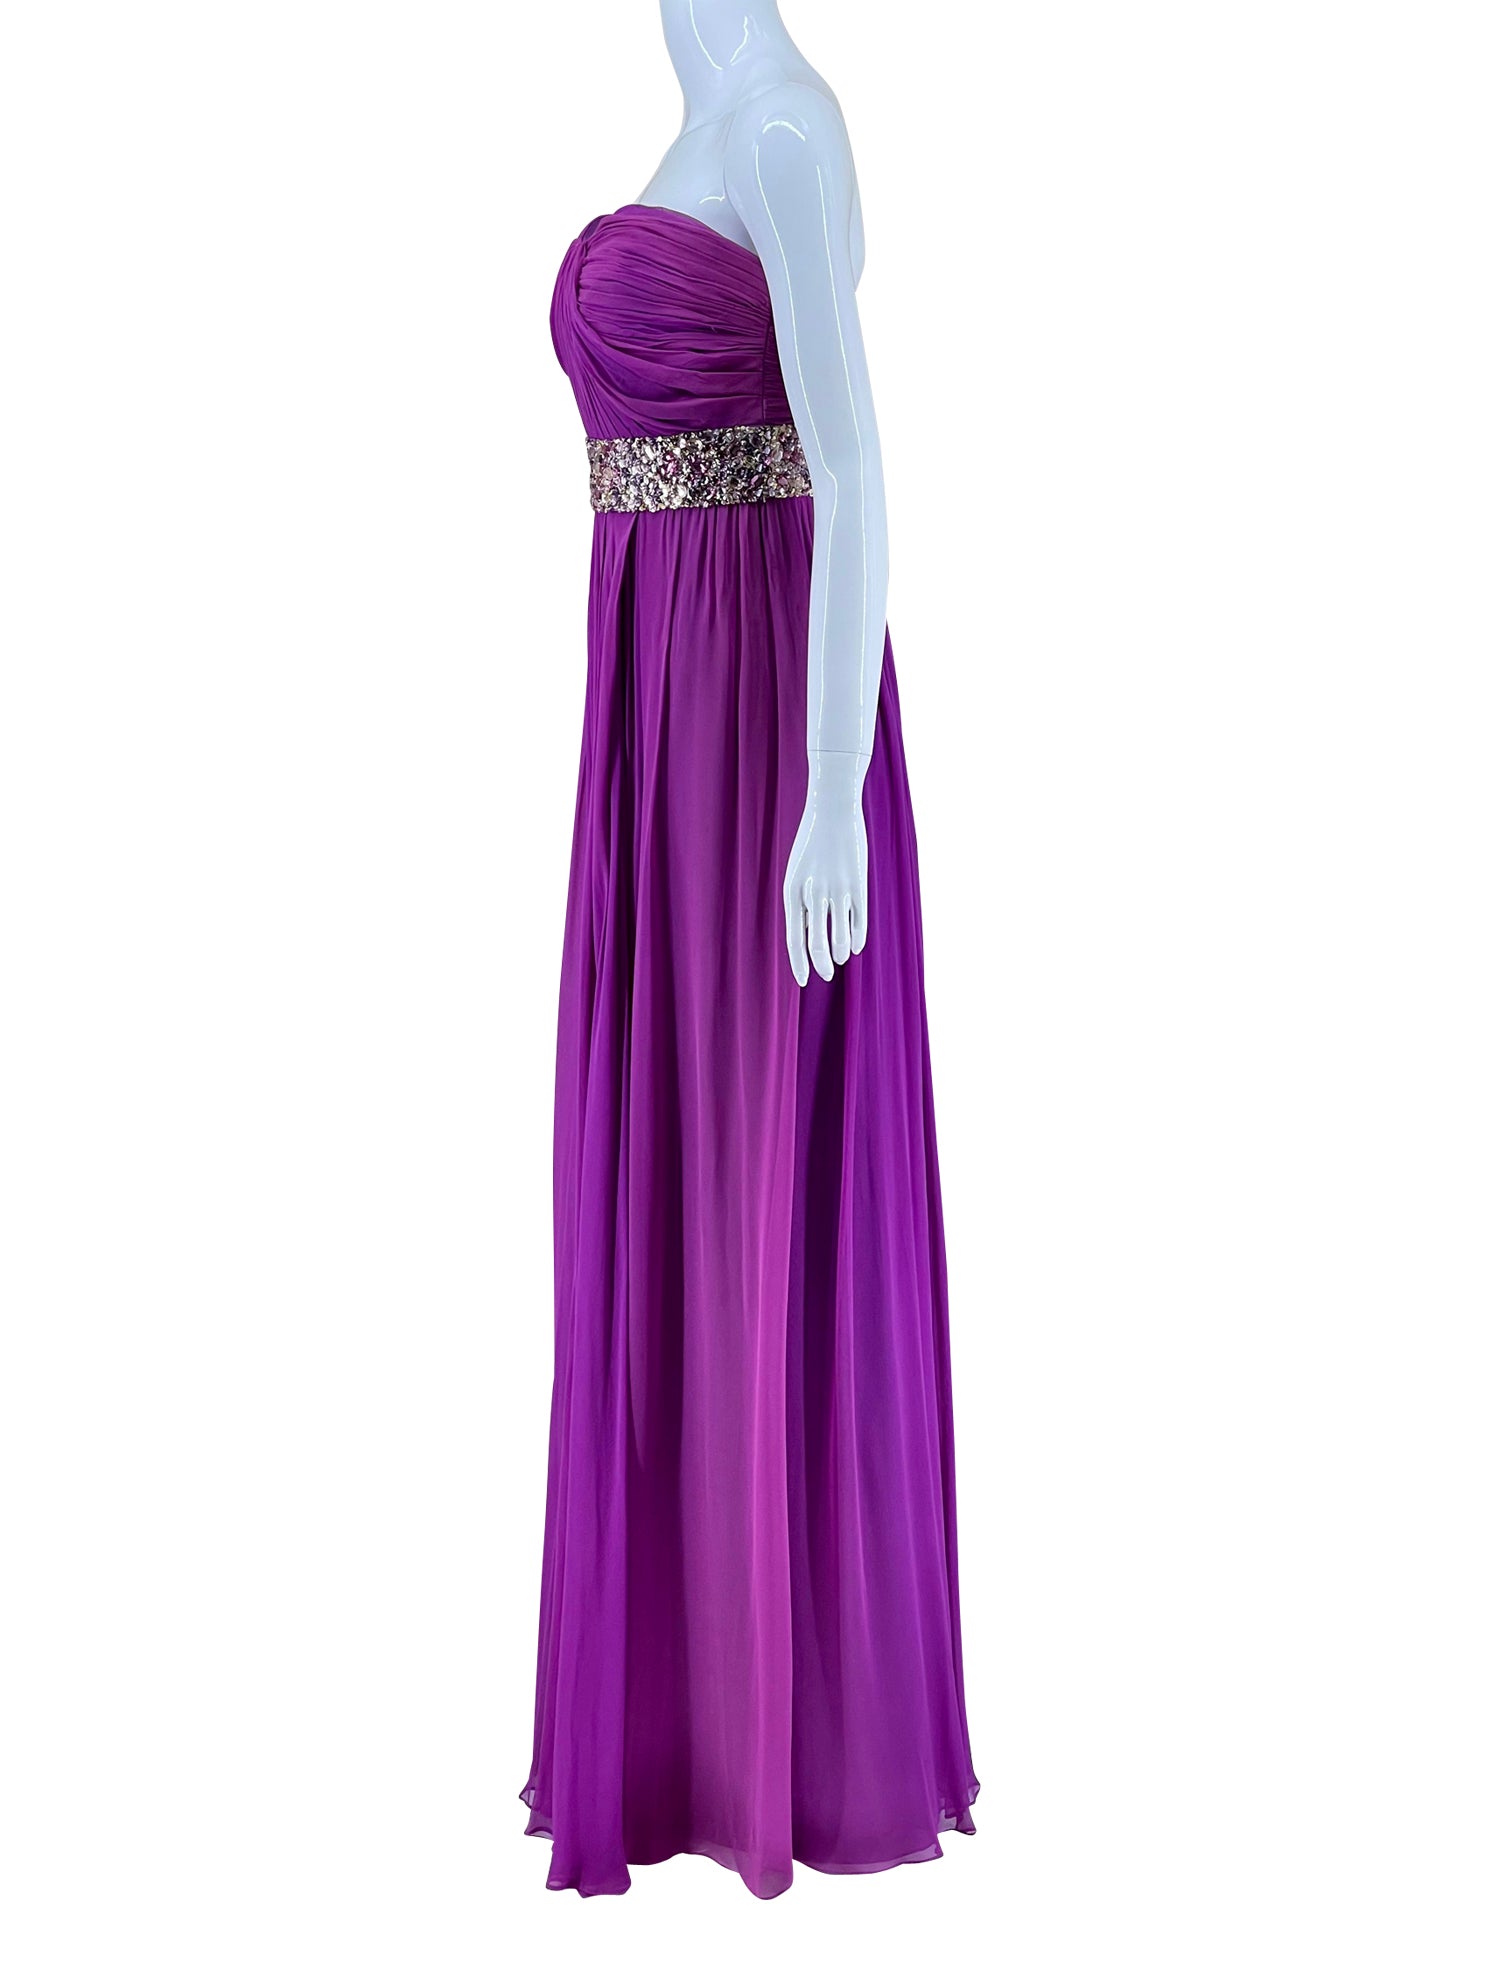 Marchesa Notte Embellished Evening Gown